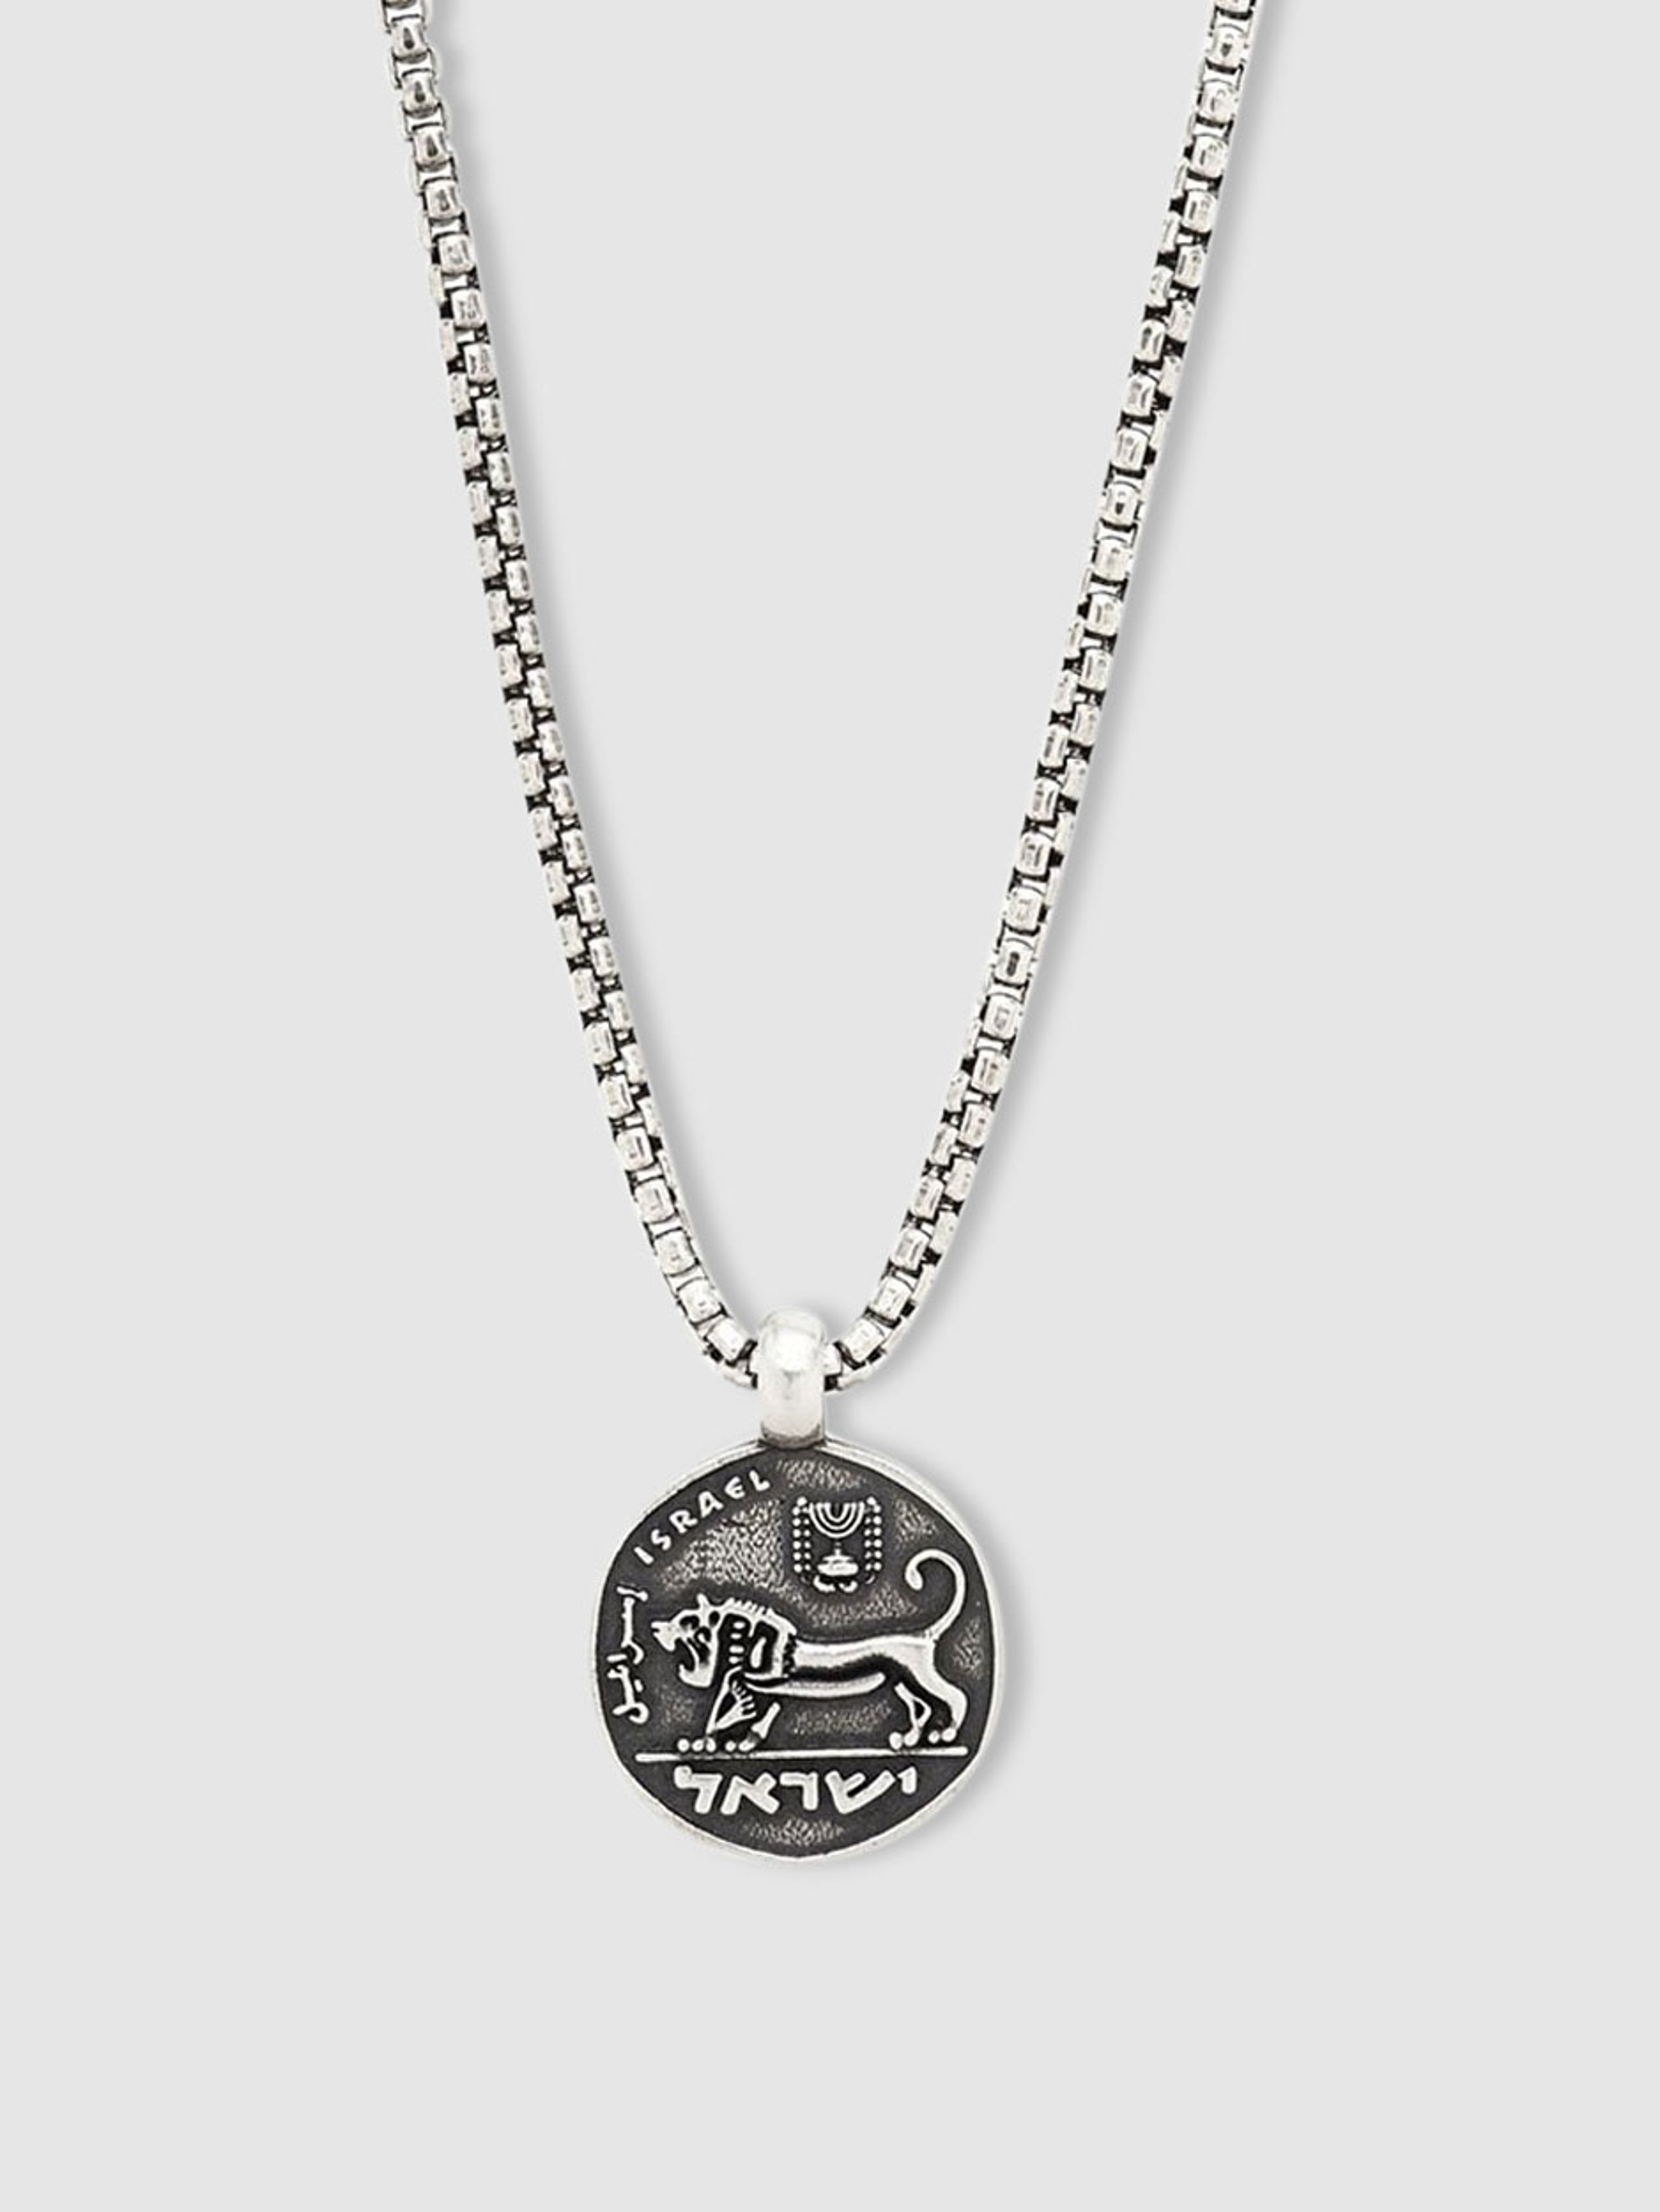 DEGS & SAL DEGS & SAL STERLING SILVER ANCIENT ISRAELI LION COIN NECKLACE